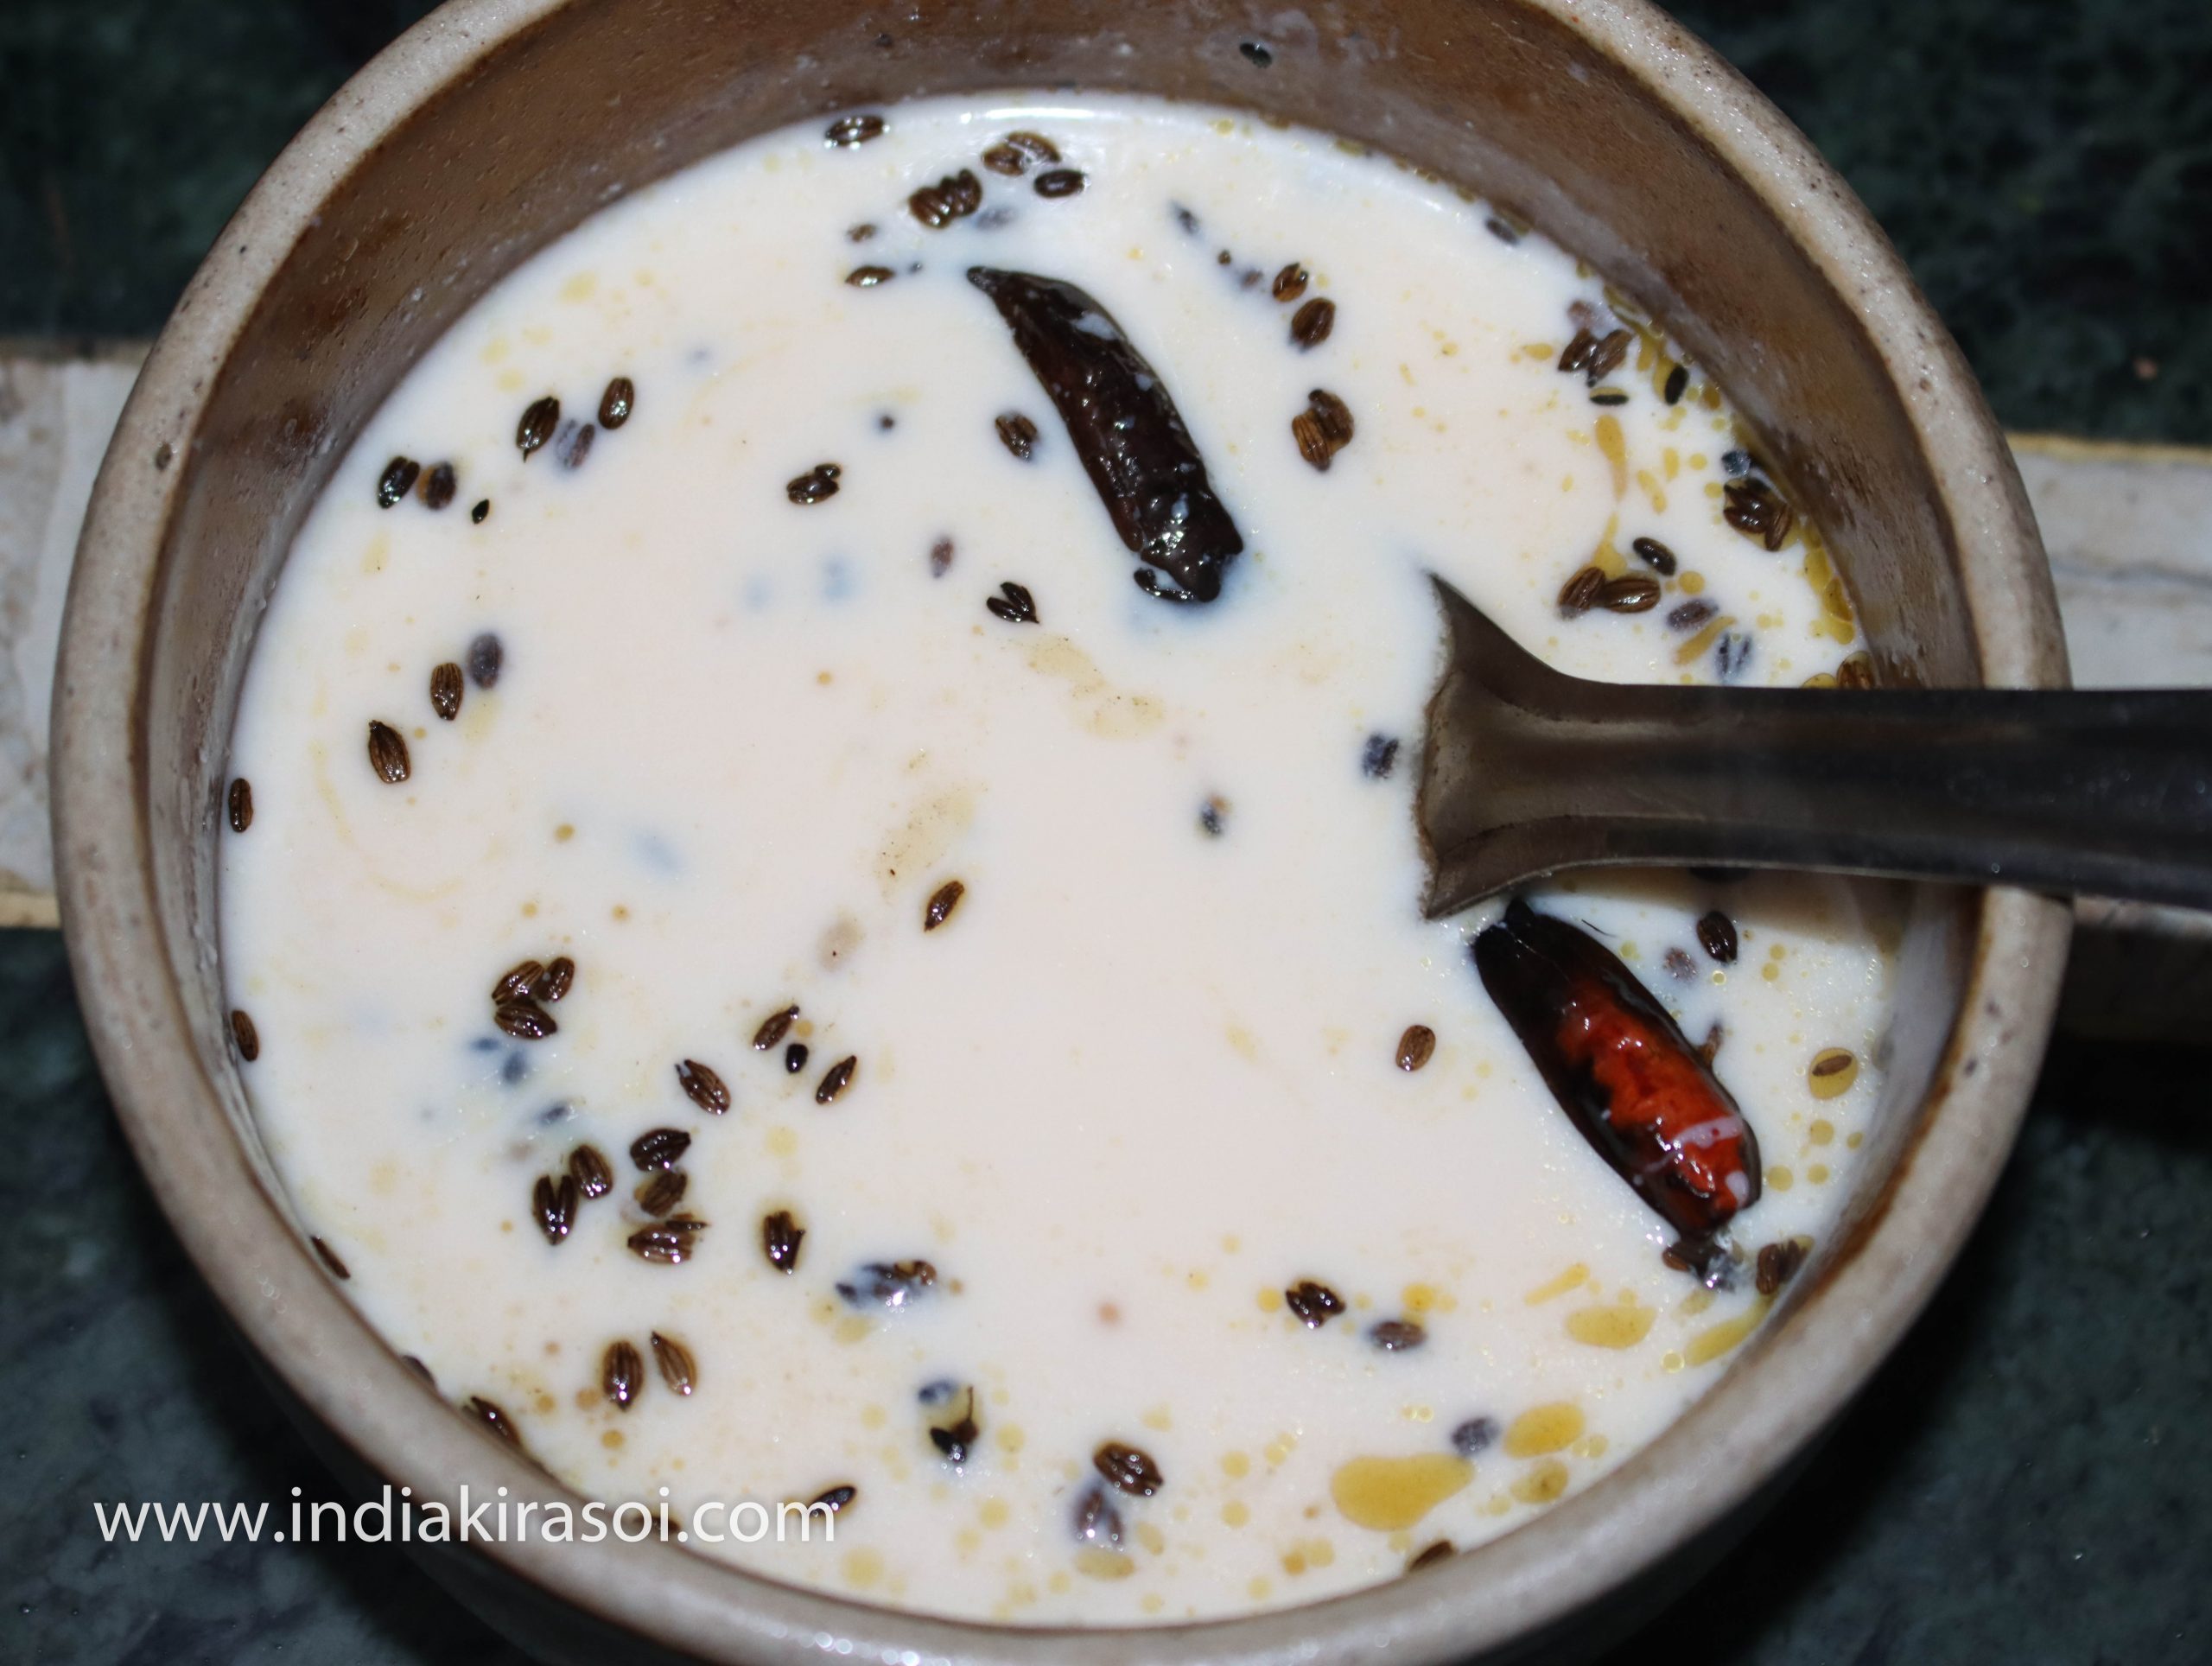 After this, pour the tempering in the whey/ mattha, cover the vessel with a plate as soon as you add the tempering. So that the fragrance of asafetida should remain in the whey liquid or mattha.